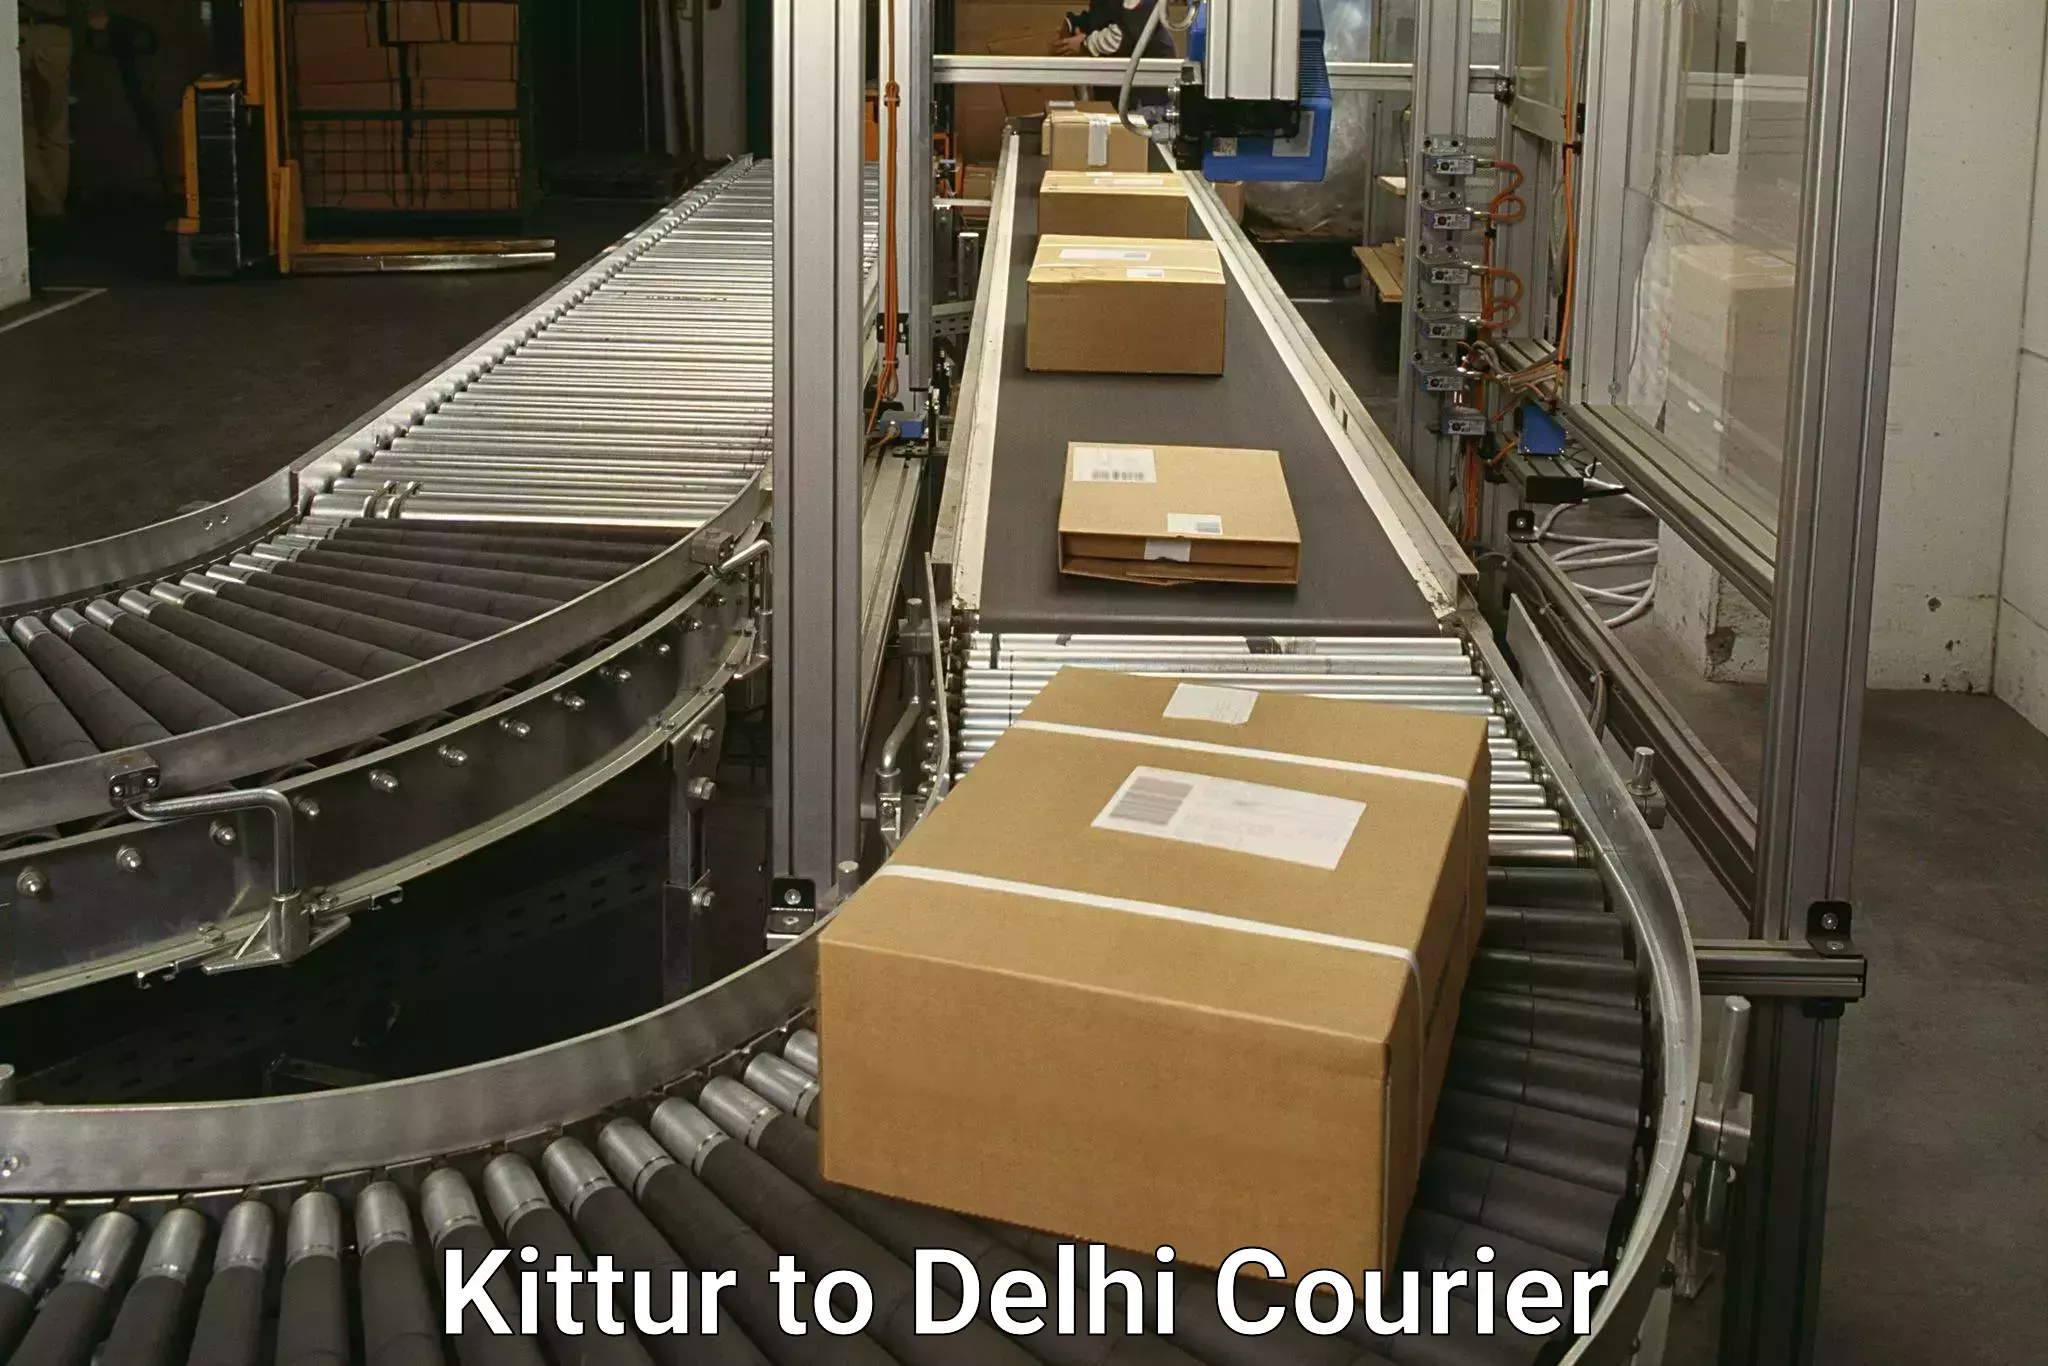 State-of-the-art courier technology Kittur to Delhi